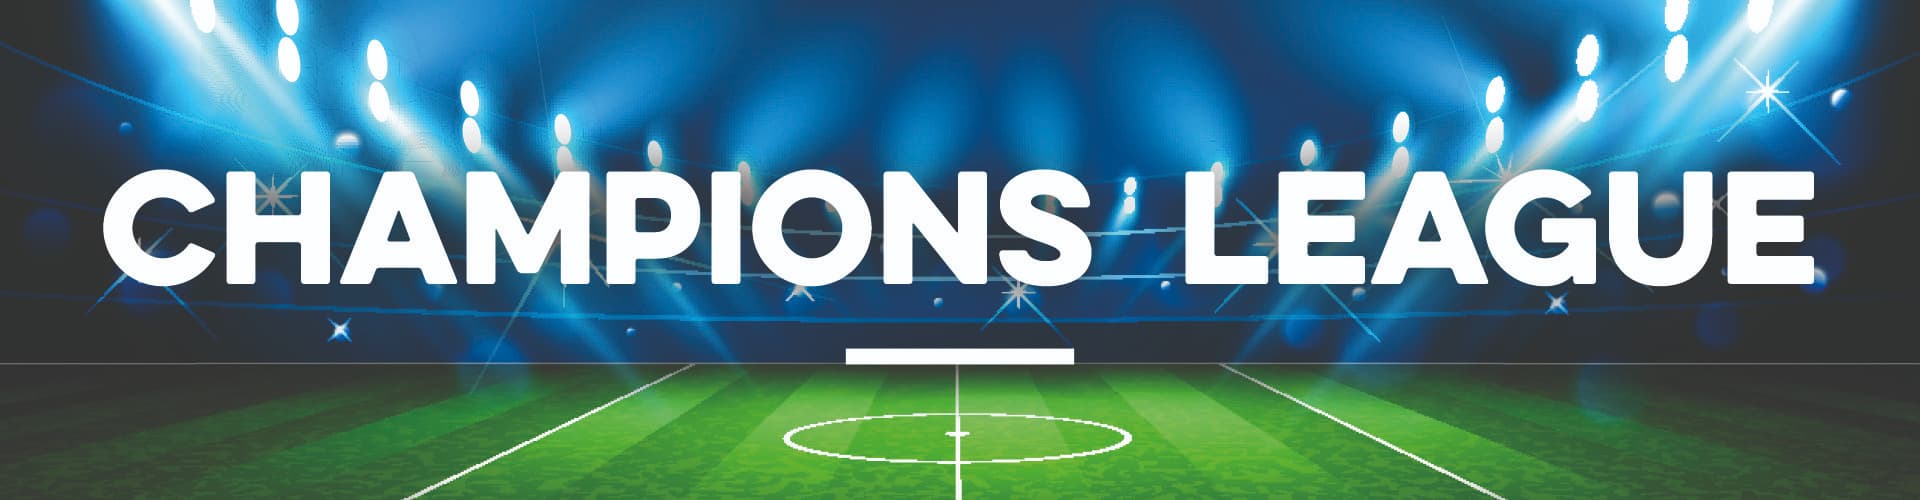 Watch Champions League Football live in Hornchurch